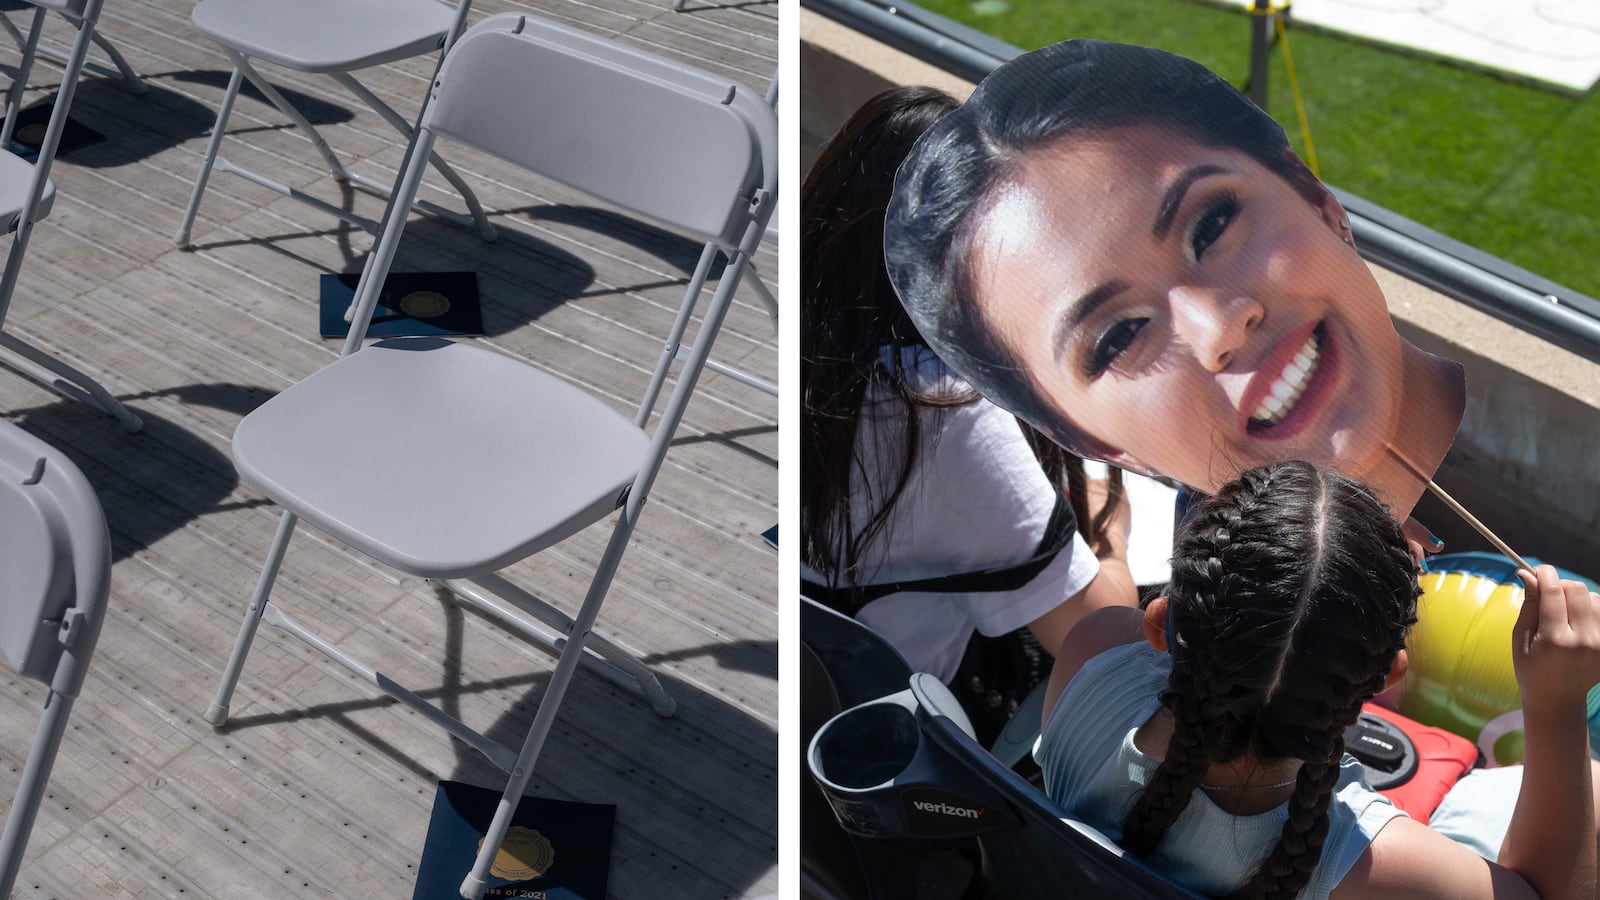 (Left) Graduation programs rest underneath folding chairs at Soldier Field. (Right) Vanessa Tran holds a large photo of her sister Katylnn Tran, a senior at Whitney M. Young Magnet High School, to shade herself from the sun at the graduation ceremony at Soldier Field on Wednesday afternoon.